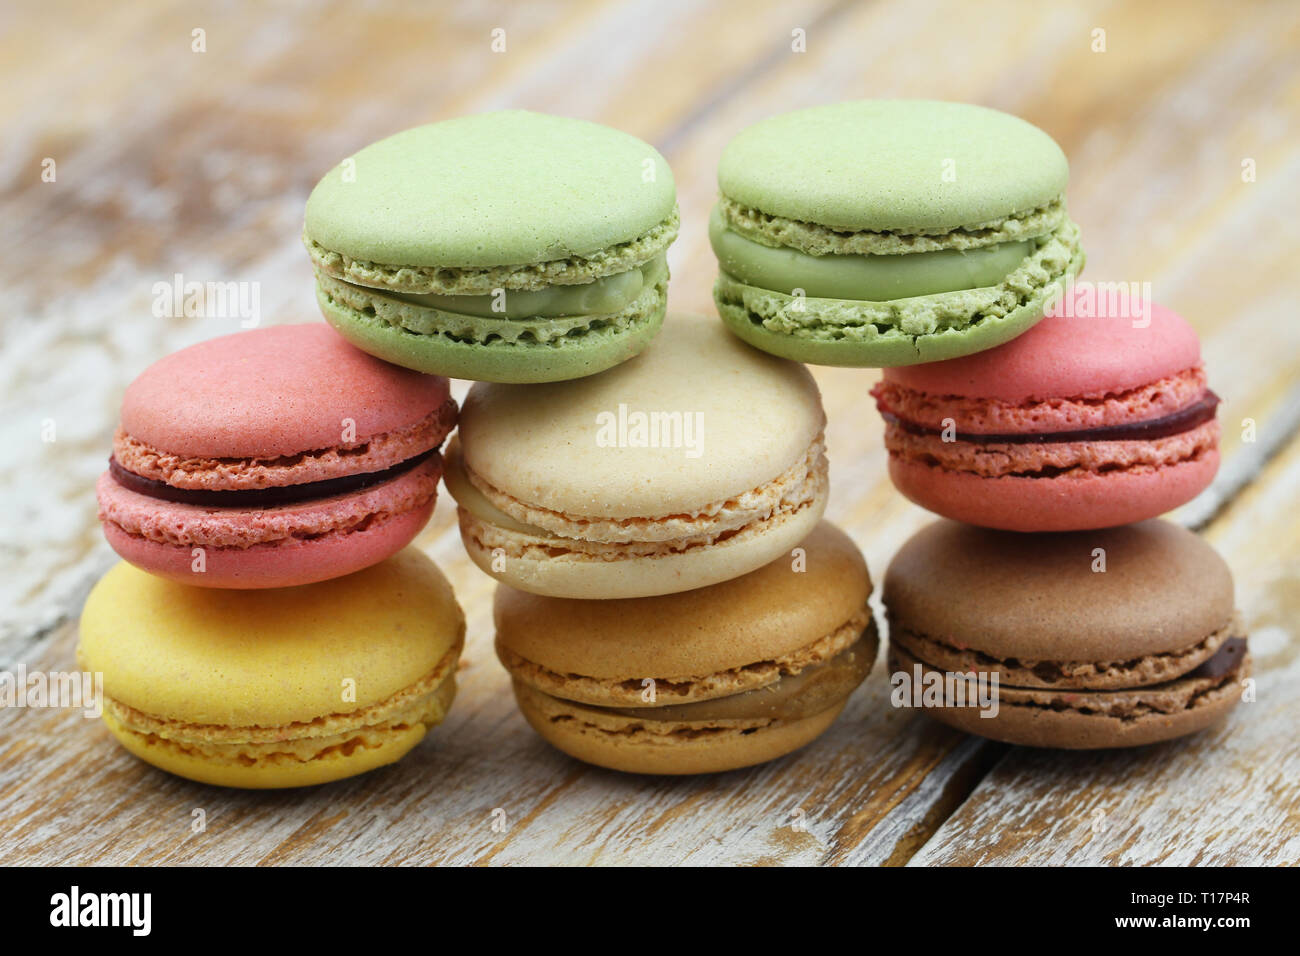 Stack of pistachio, chocolate and raspberry macaroons on wooden surface Stock Photo